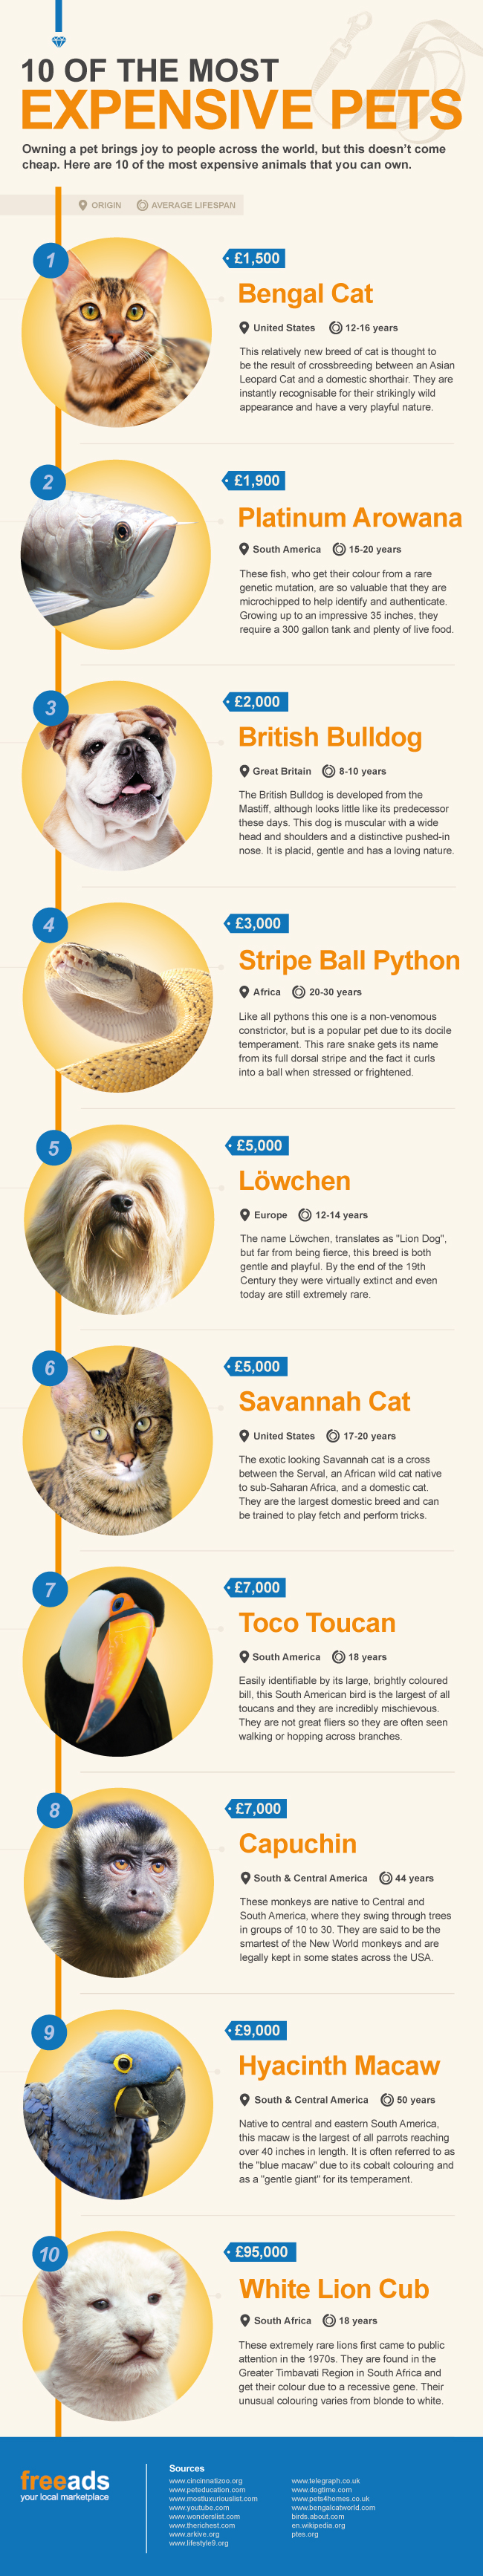 10 of the most expensive pets